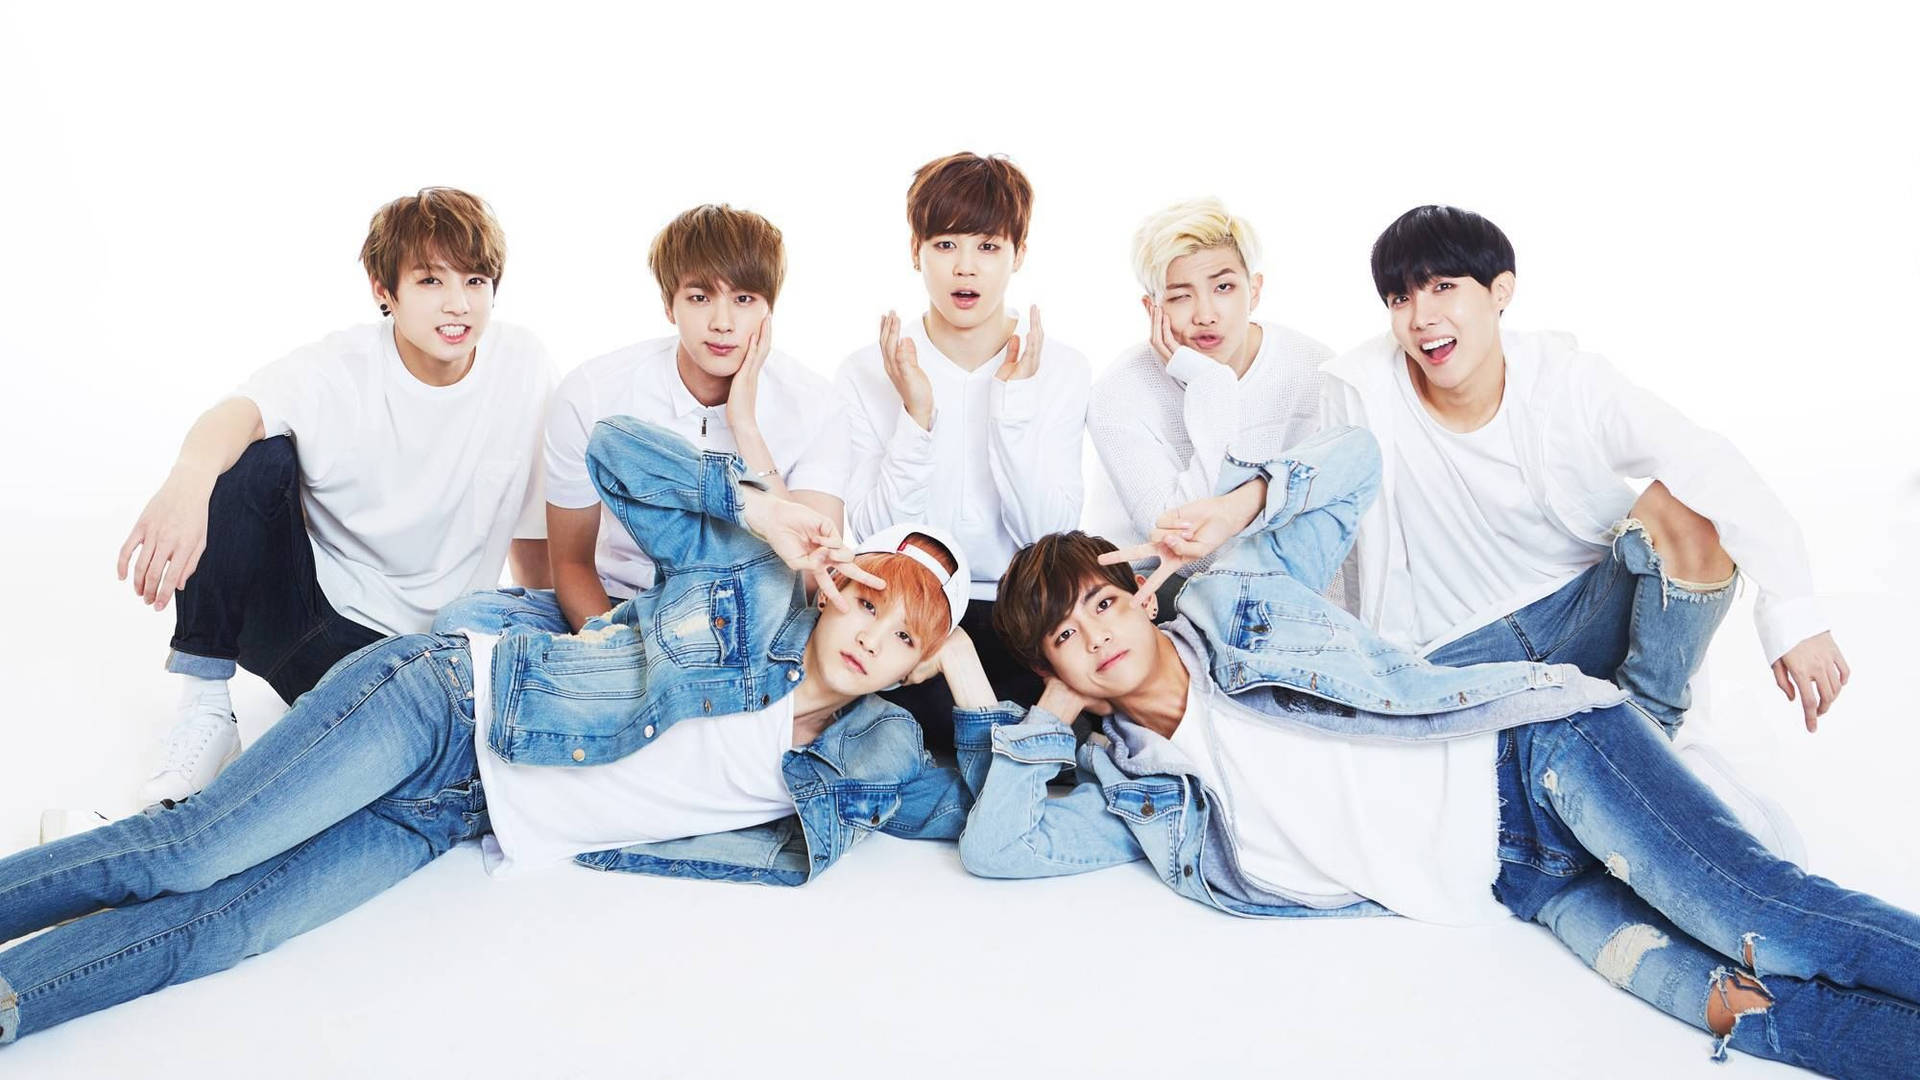 Bts In White And Denim